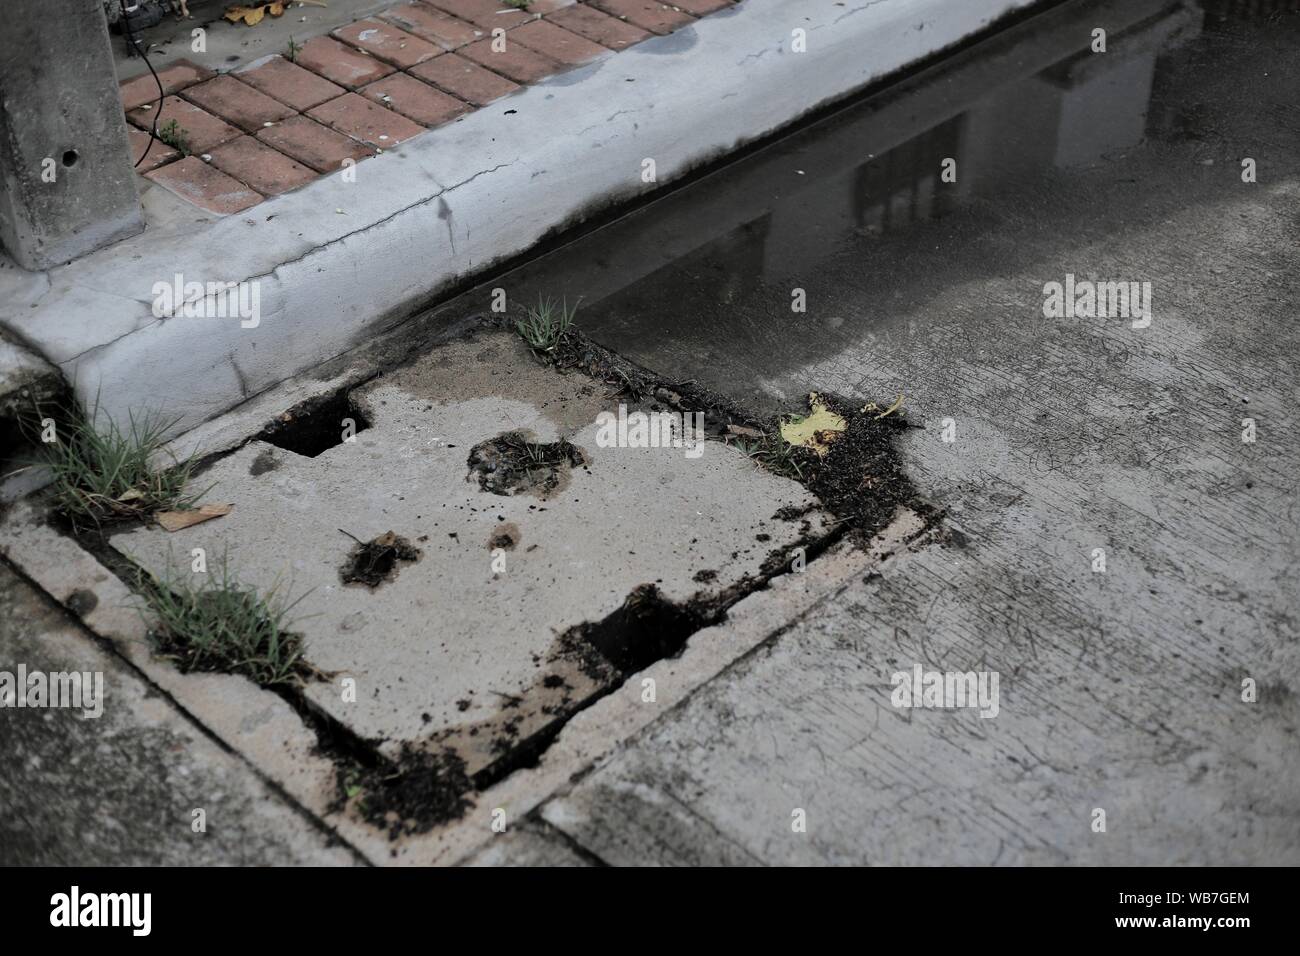 dirt filled concrete grating on a manhole gutter cover. bad condition infrastructure with weed growing on. catch basin on concrete road. Stock Photo